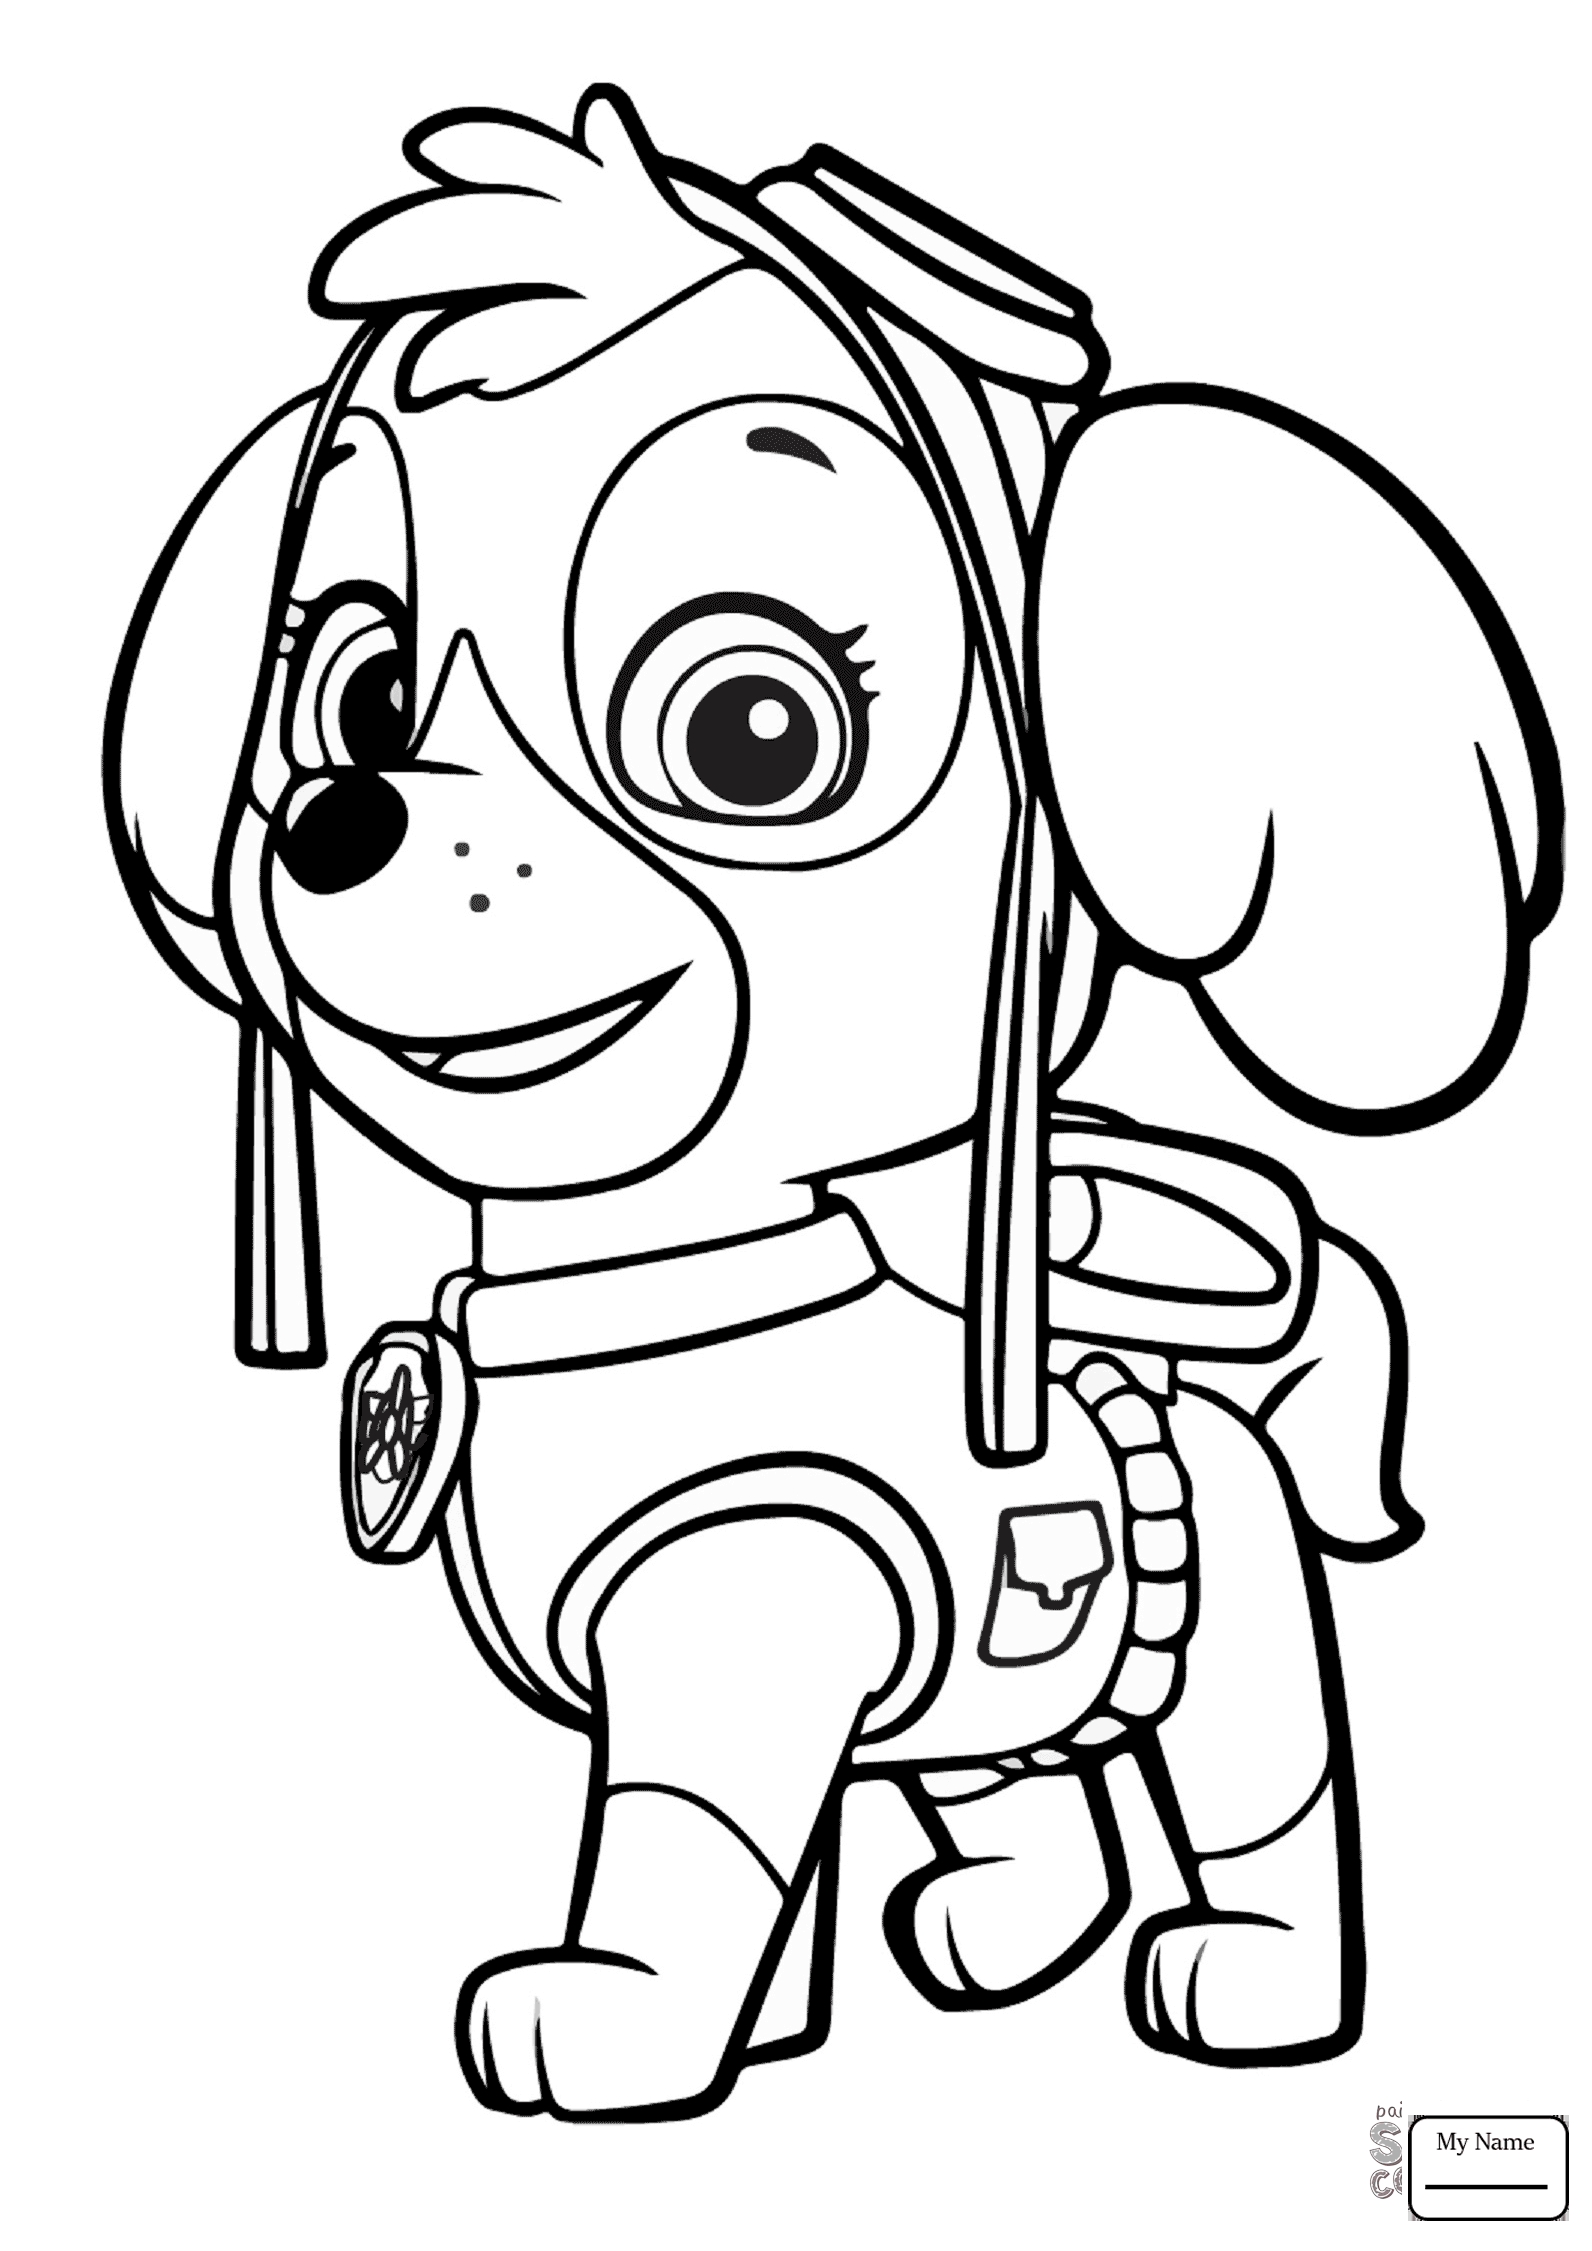 Paw Patrol Everest Coloring Page at GetColoringscom